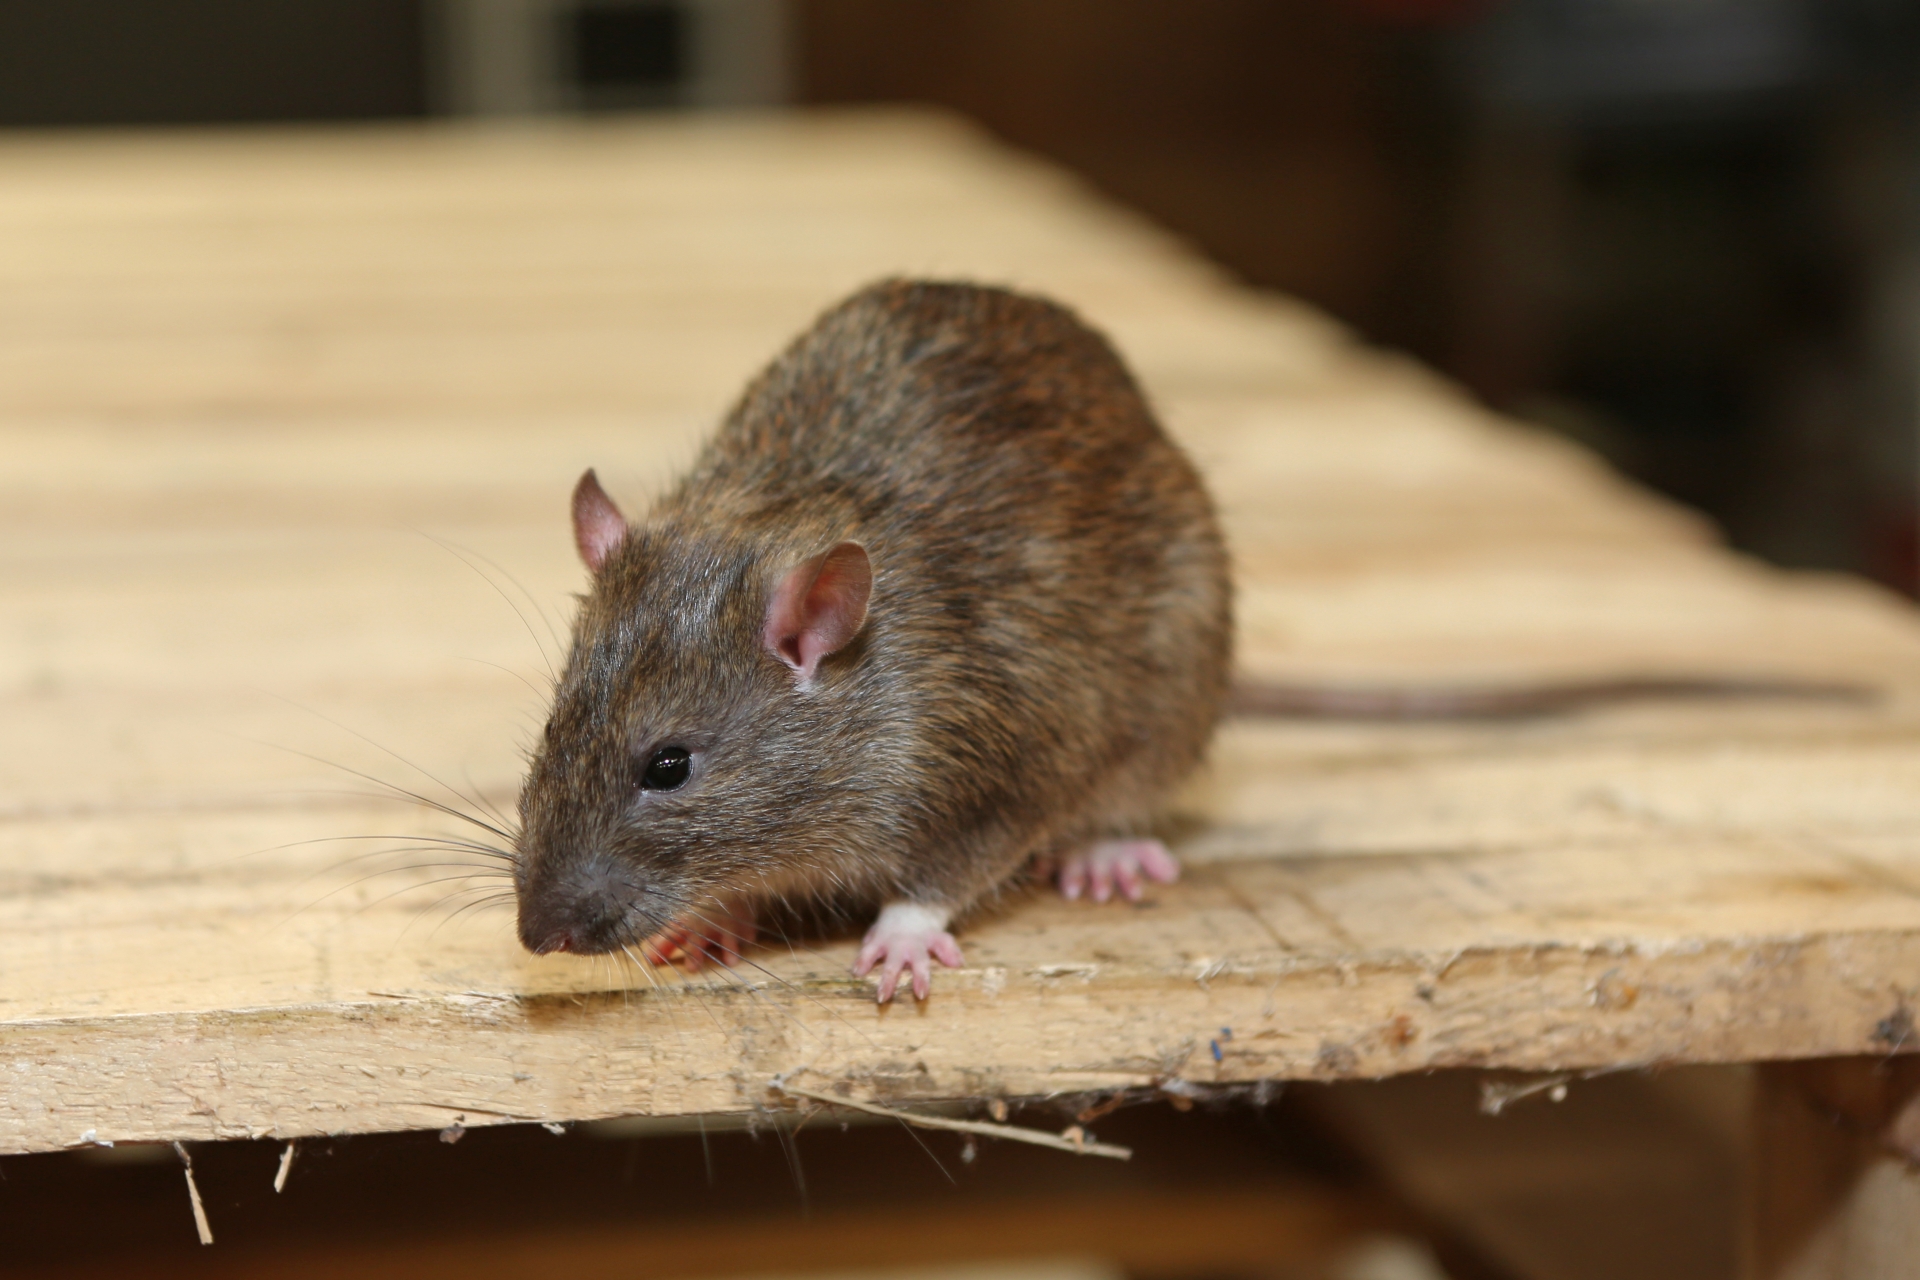 Rat Infestation, Pest Control in Manor Park, E12. Call Now 020 8166 9746